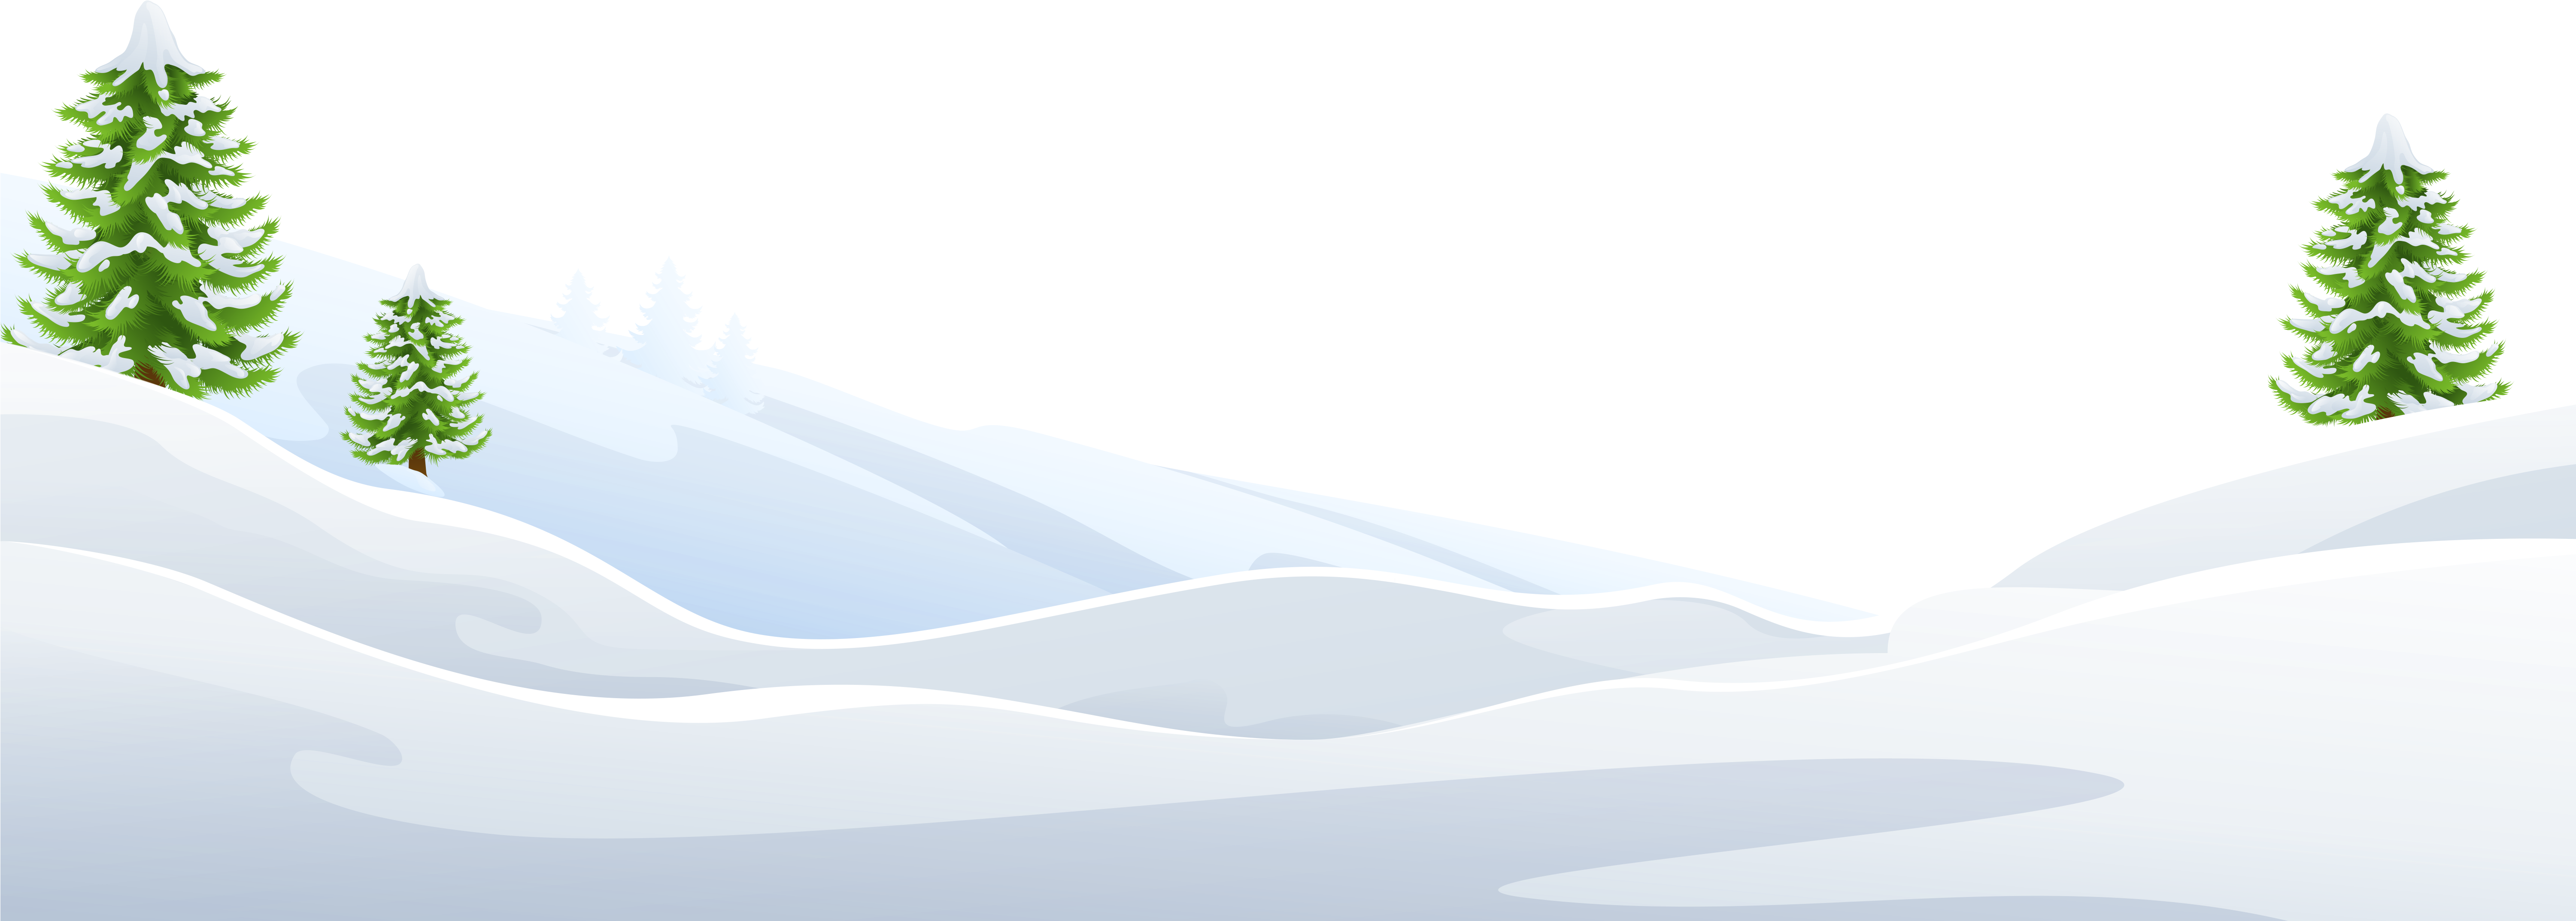 Download Snow Clipart Snowy - Transparent Snow On Ground Png - ClipartKey